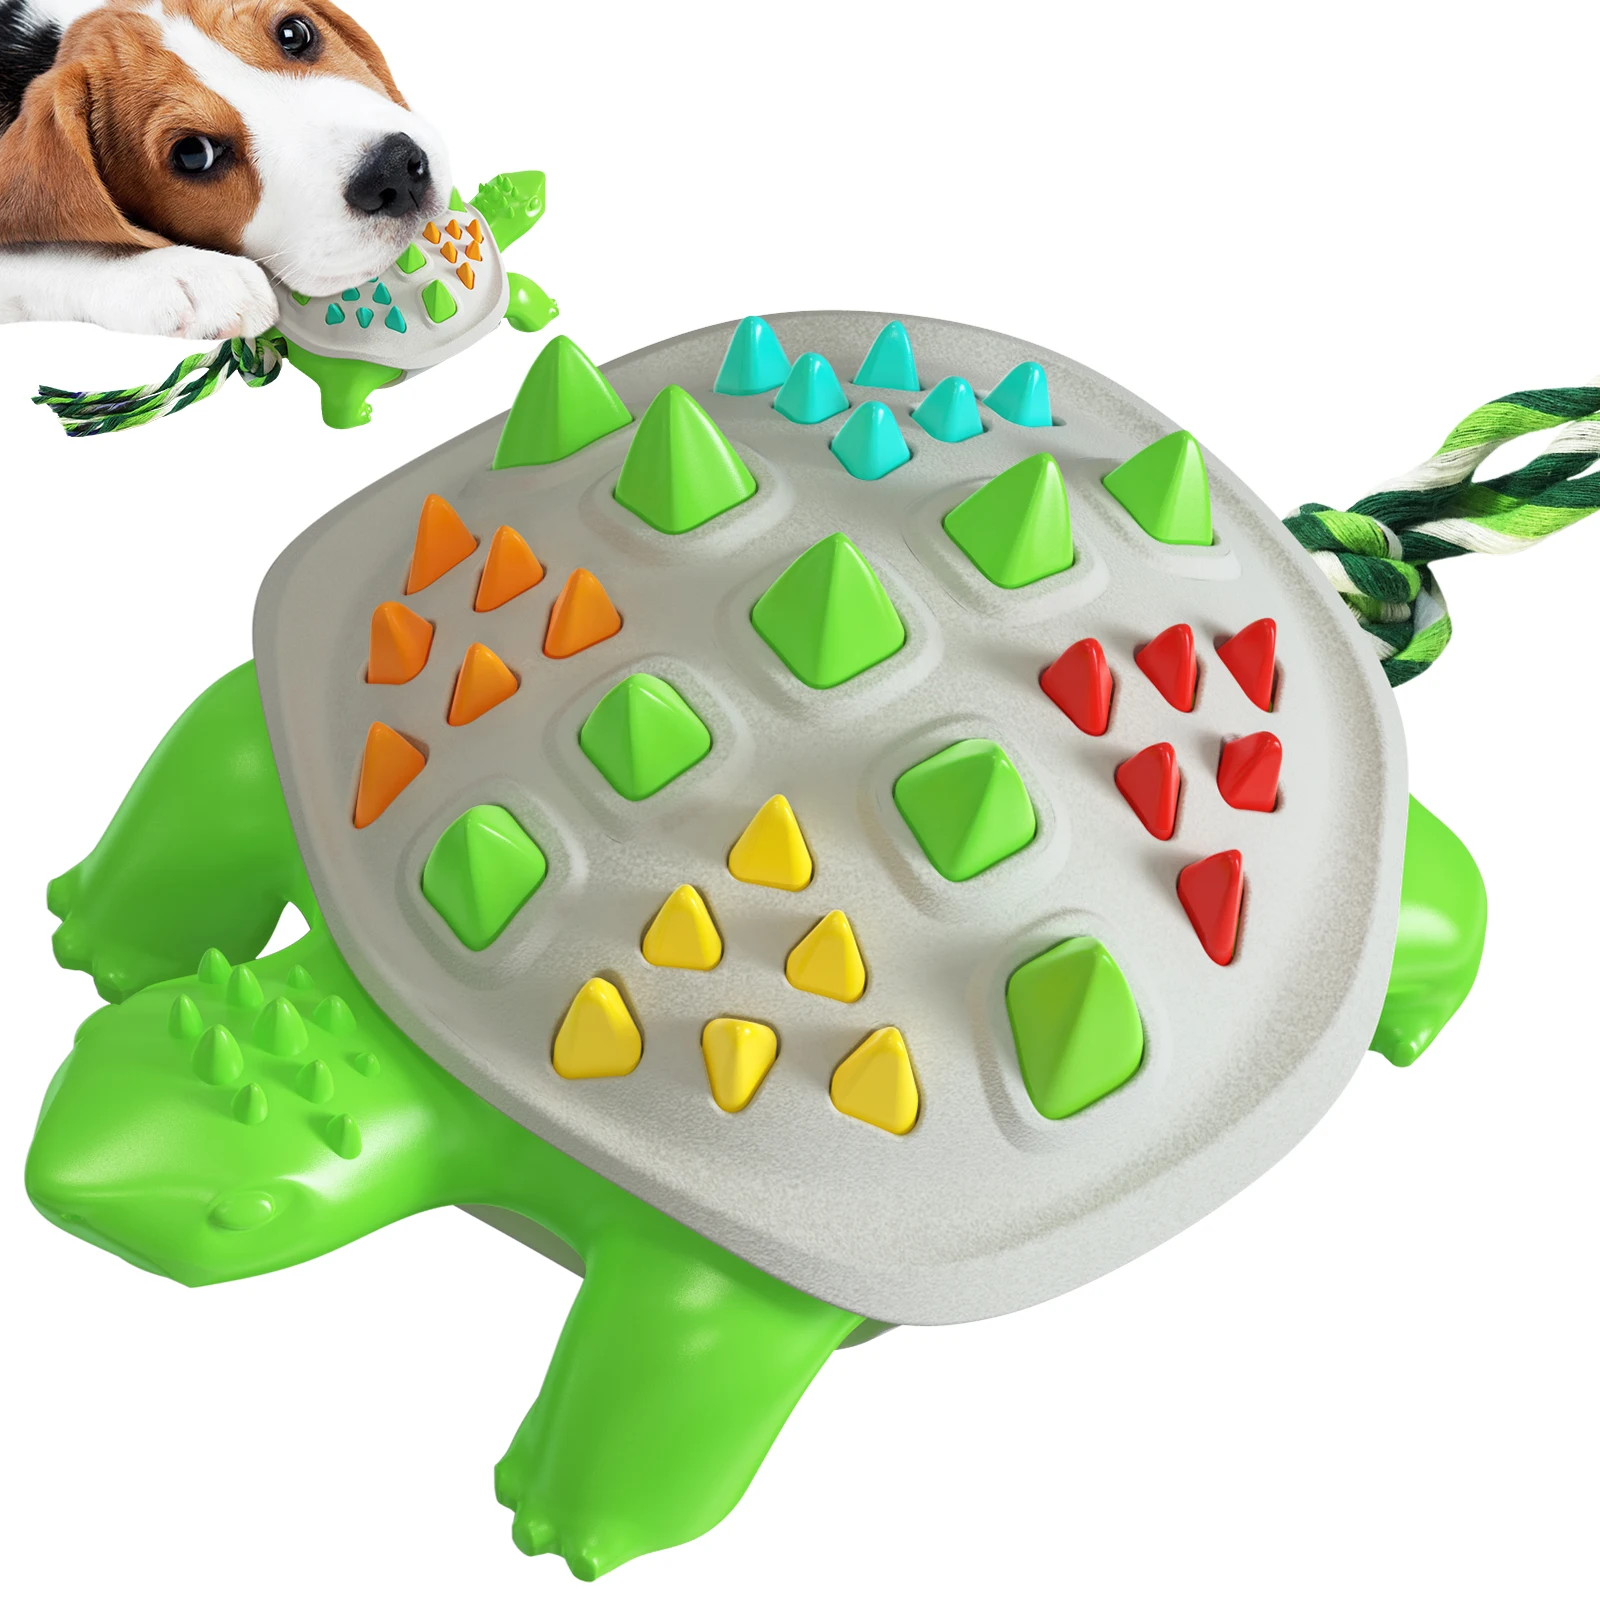 

Amazon Hot Selling dog cleaning teeth toy Colorful turtle Interactive Dog Toy, Chocolate+blue+green+yellow/gray + green+blue+yellow